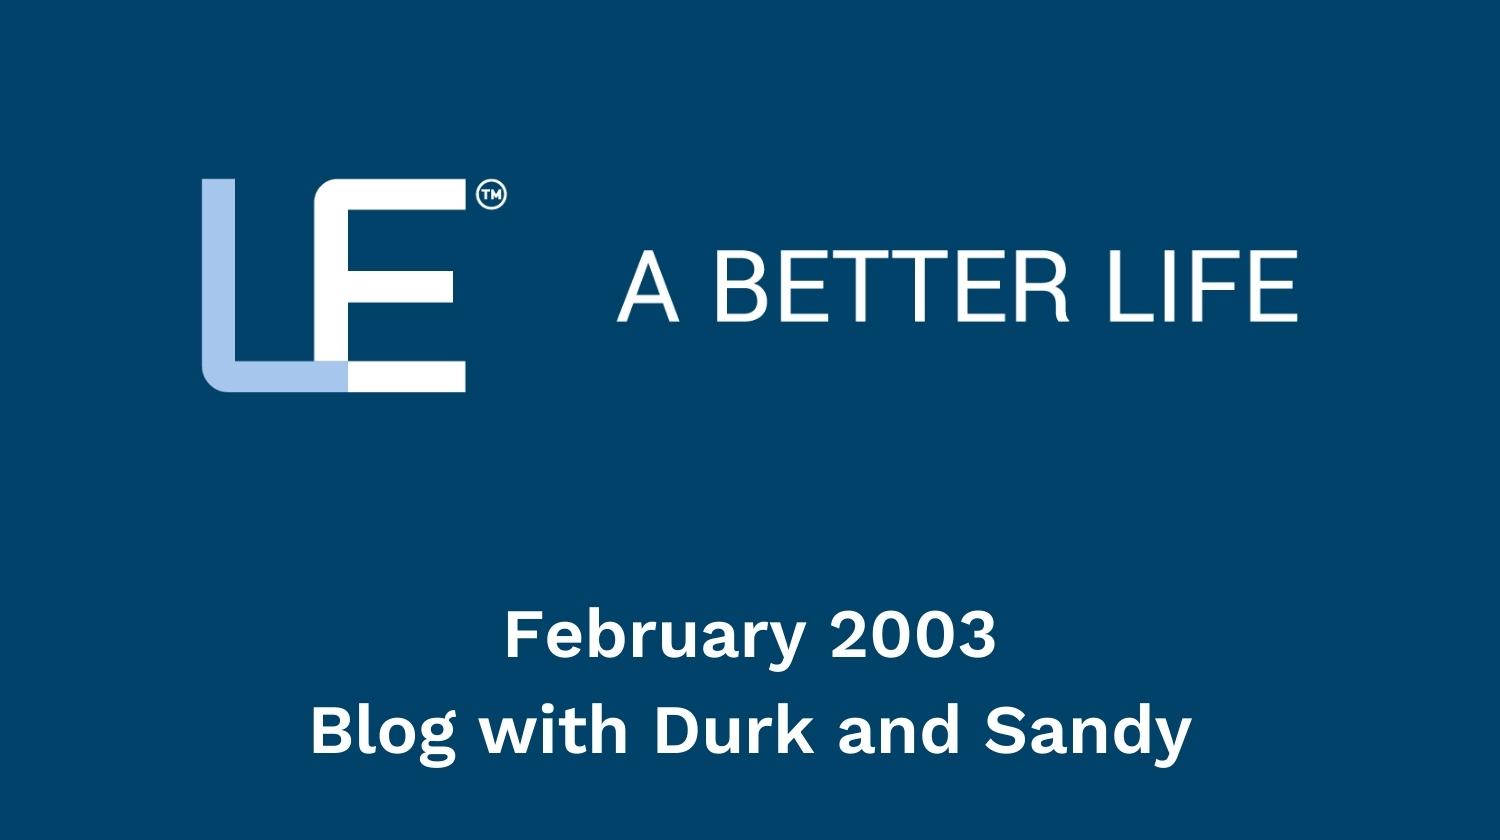 February 2003 Blog with Durk and Sandy